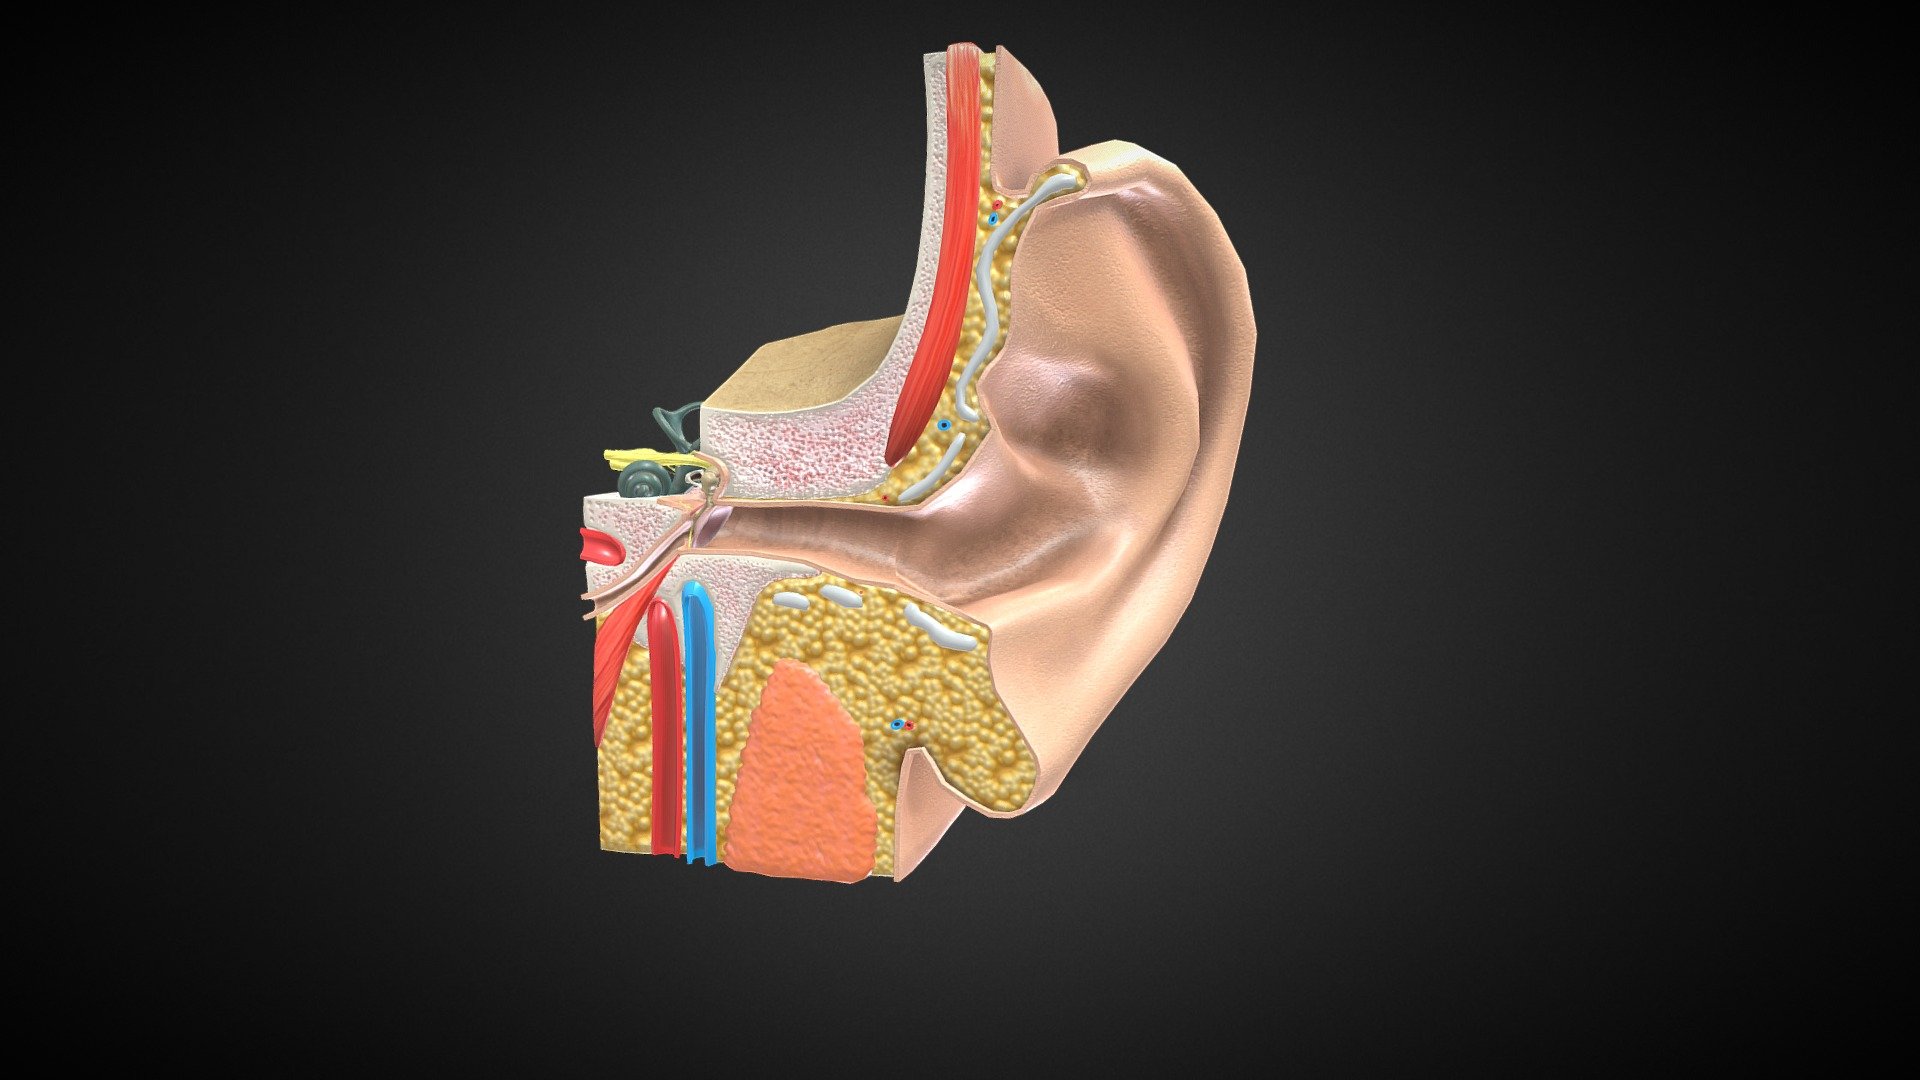 3D Ear Anatomy
U can find this model for sale on Turbosquid by searching for “ear 1818331”( that’s the closest I can get to giving a link without breaking sketchfab’s ToS)






No errors or missing files

High-quality polygonal model

No N-GONS Faces

This model is created in polygon quad &amp; tri with good edge flow, So you can edit and change it according to your requirements

Objects are grouped and named

The scene is well arranged ( layer and group)

Objects, materials, and textures are named

4K Textures



Poly Details:




Units in all formats: centimeters

Polygon: Quad and Tri (Subdivision-ready)

Polys counts: 14137


Vertices counts: 14668




Dimension:



(X=15 cm Y=6 cm Z=18 cm)



Formats:




3Ds Max 2014 _V-Ray

3Ds Max 2014 _Scanline

Maya 2016_V-Ray

Cinema 4D R20 _Standard

FBX_with Textures

OBJ

PBR TXRs

3Ds



Textures:





Diffuse-Base-Normal-Specular-Reflection-Metallic-AO-Glossines-Roughness




EarAnatomy_mtl  (9.PNG Files) _4096x4096


 - 3D Ear Anatomy - 3D model by 3D4SCI 3d model